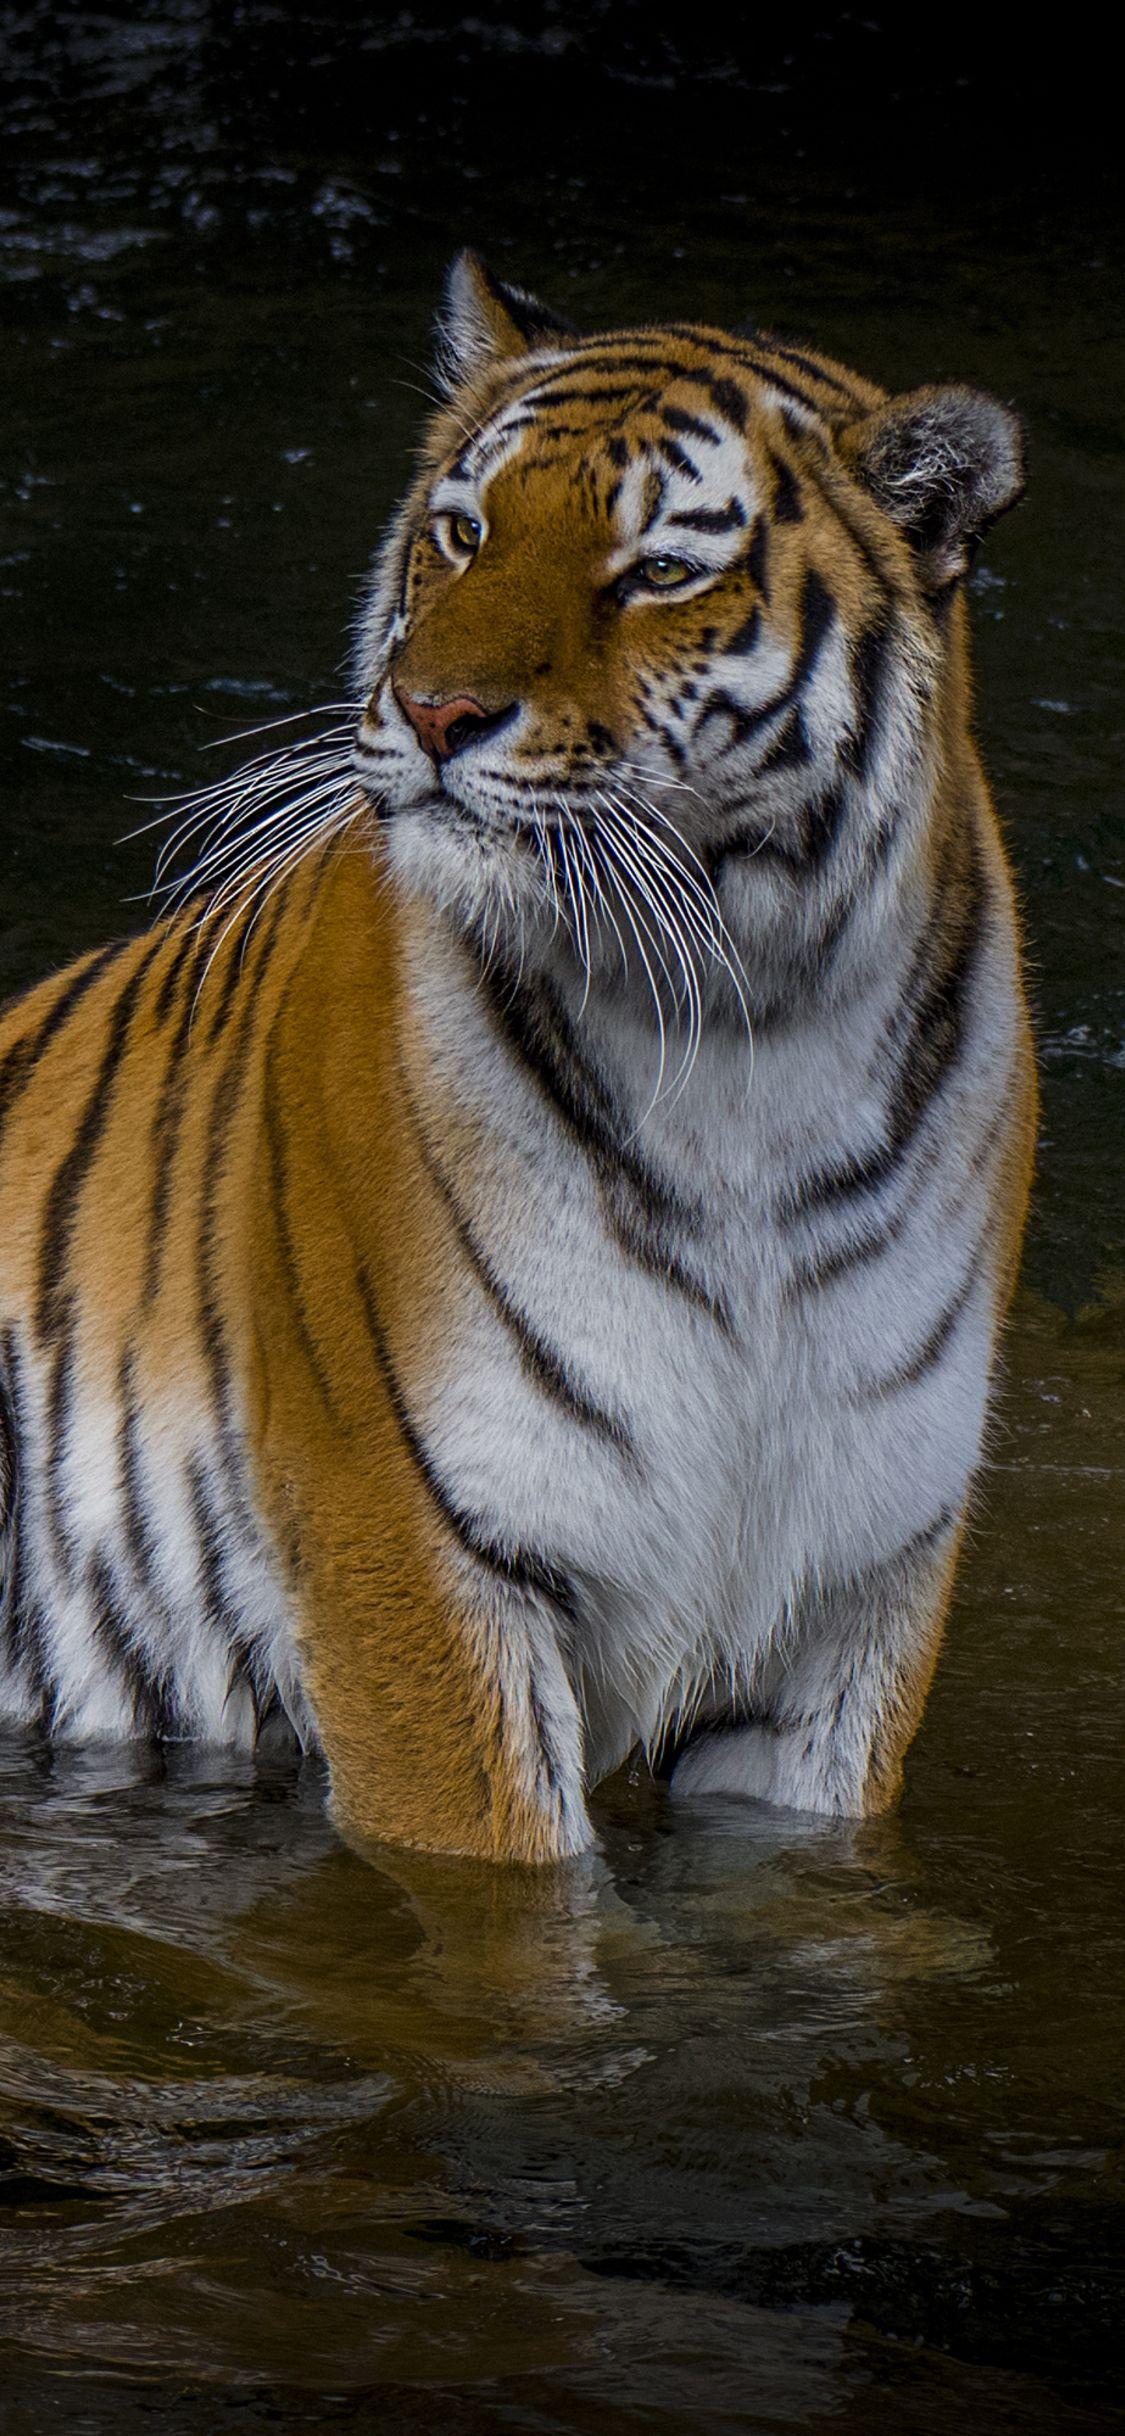 Tiger Iphone Hd Wallpapers - Top Free Tiger Iphone Hd Backgrounds